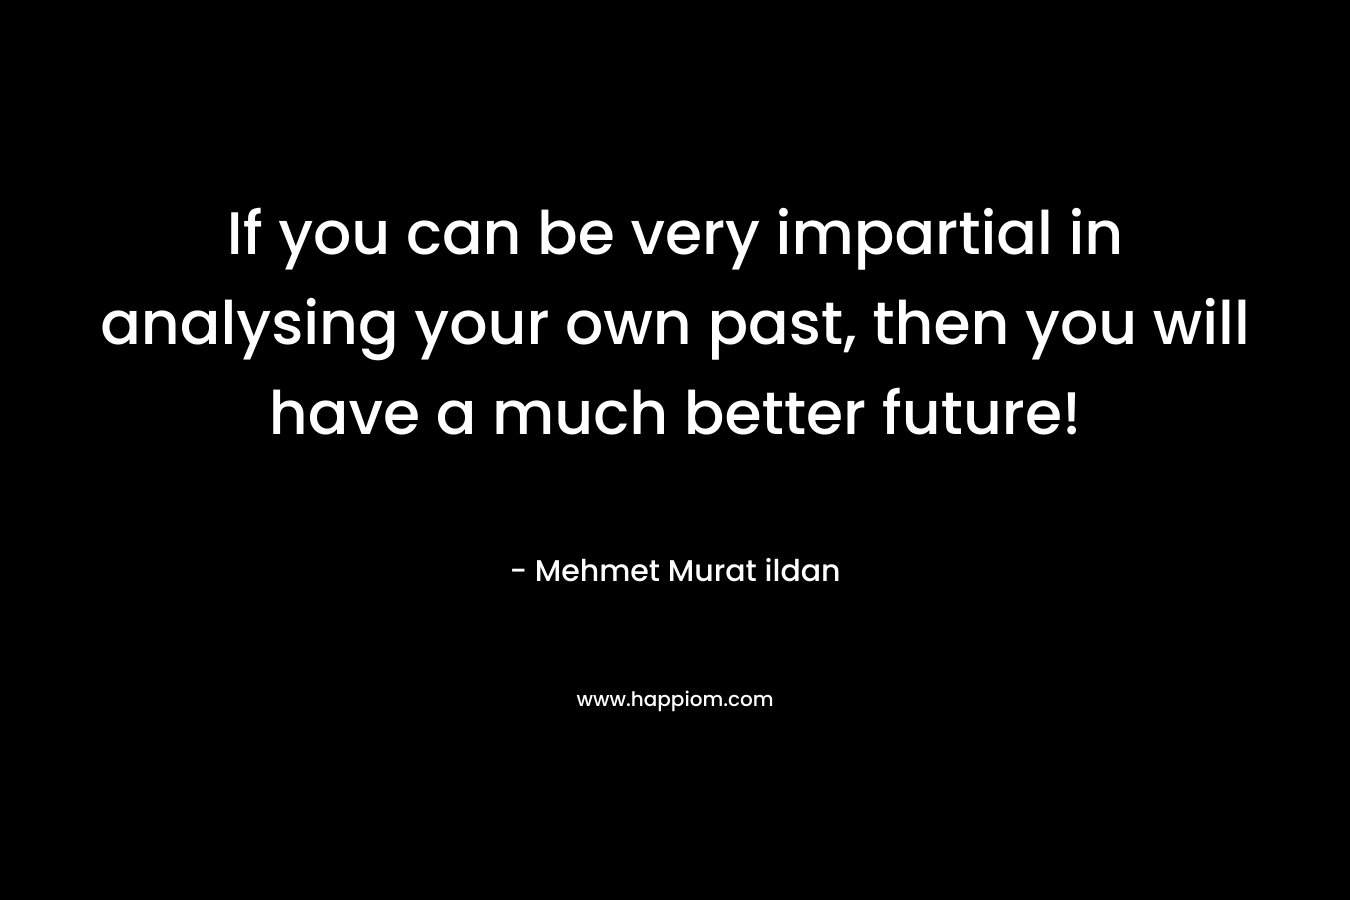 If you can be very impartial in analysing your own past, then you will have a much better future!